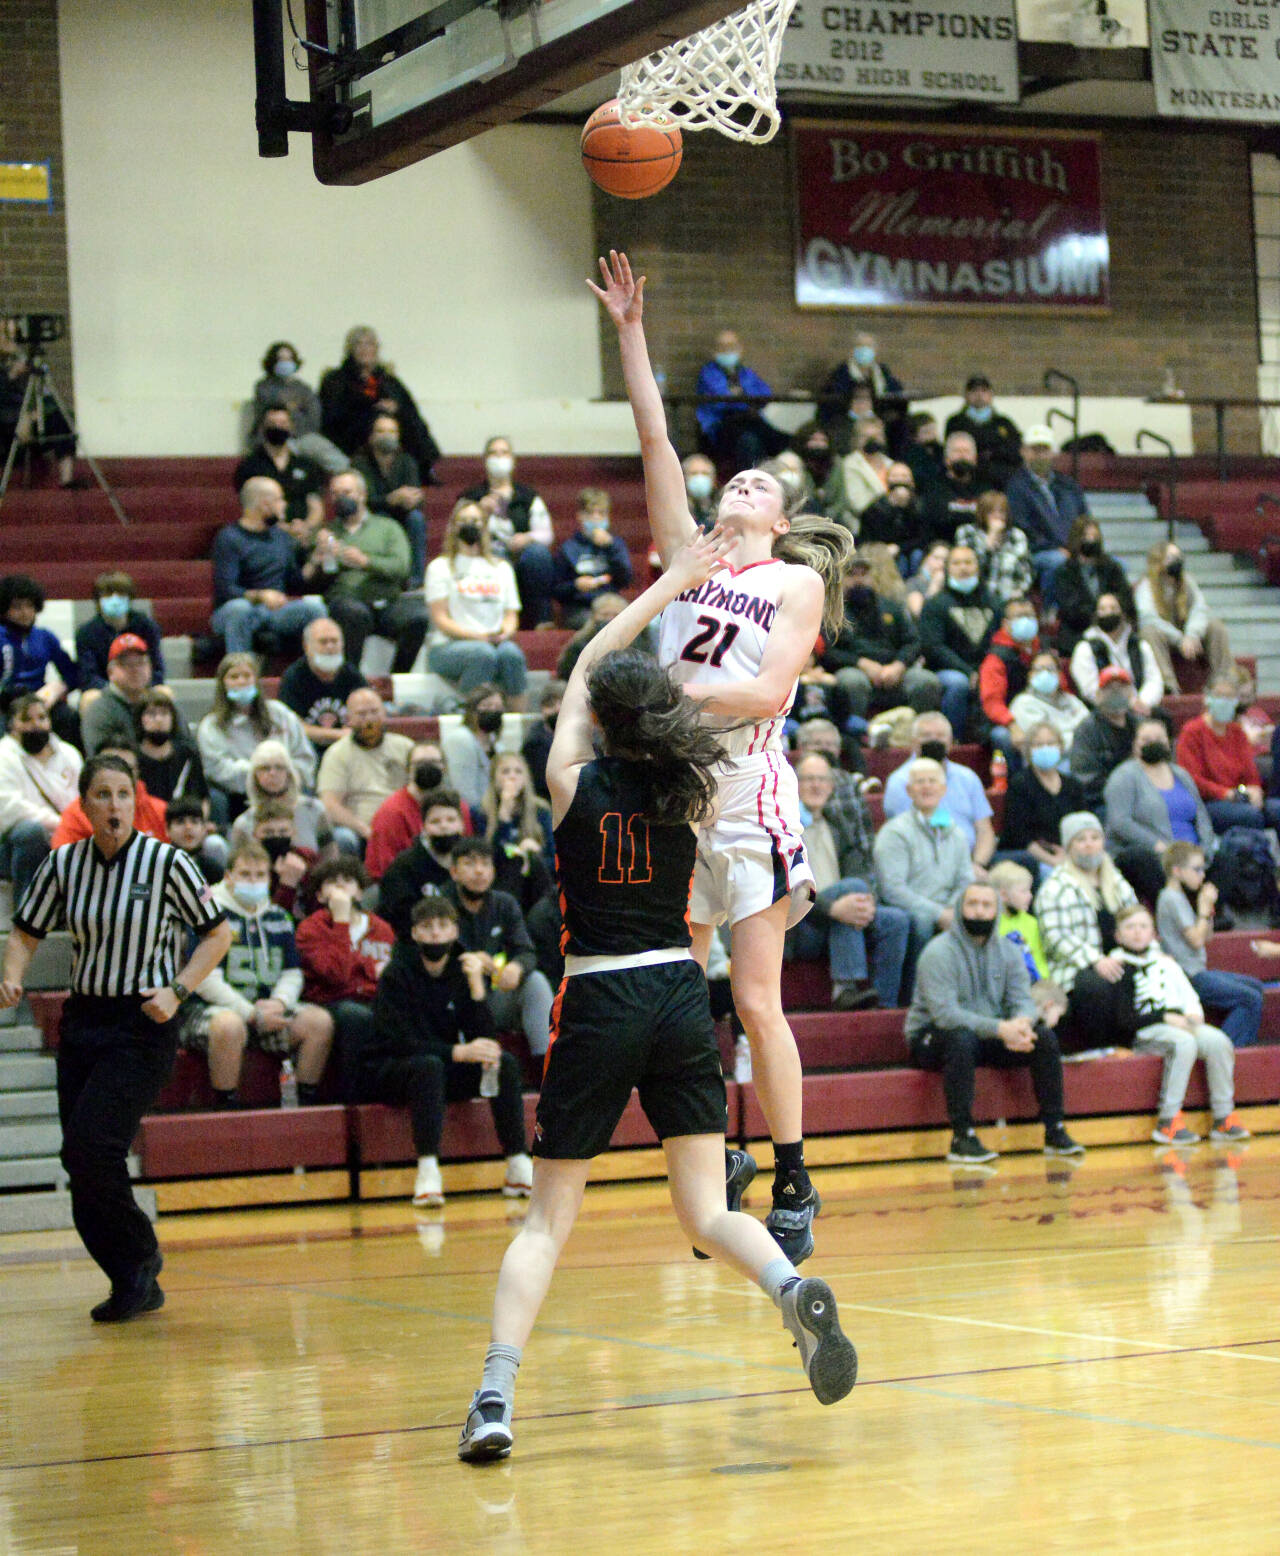 RYAN SPARKS | THE DAILY WORLD Raymond senior guard Kyra Gardner (21) scores two of her game high 22 points in a 49-32 victory over Rainier in a 2B District 4 quarterfinal game on Tuesday in Montesano.